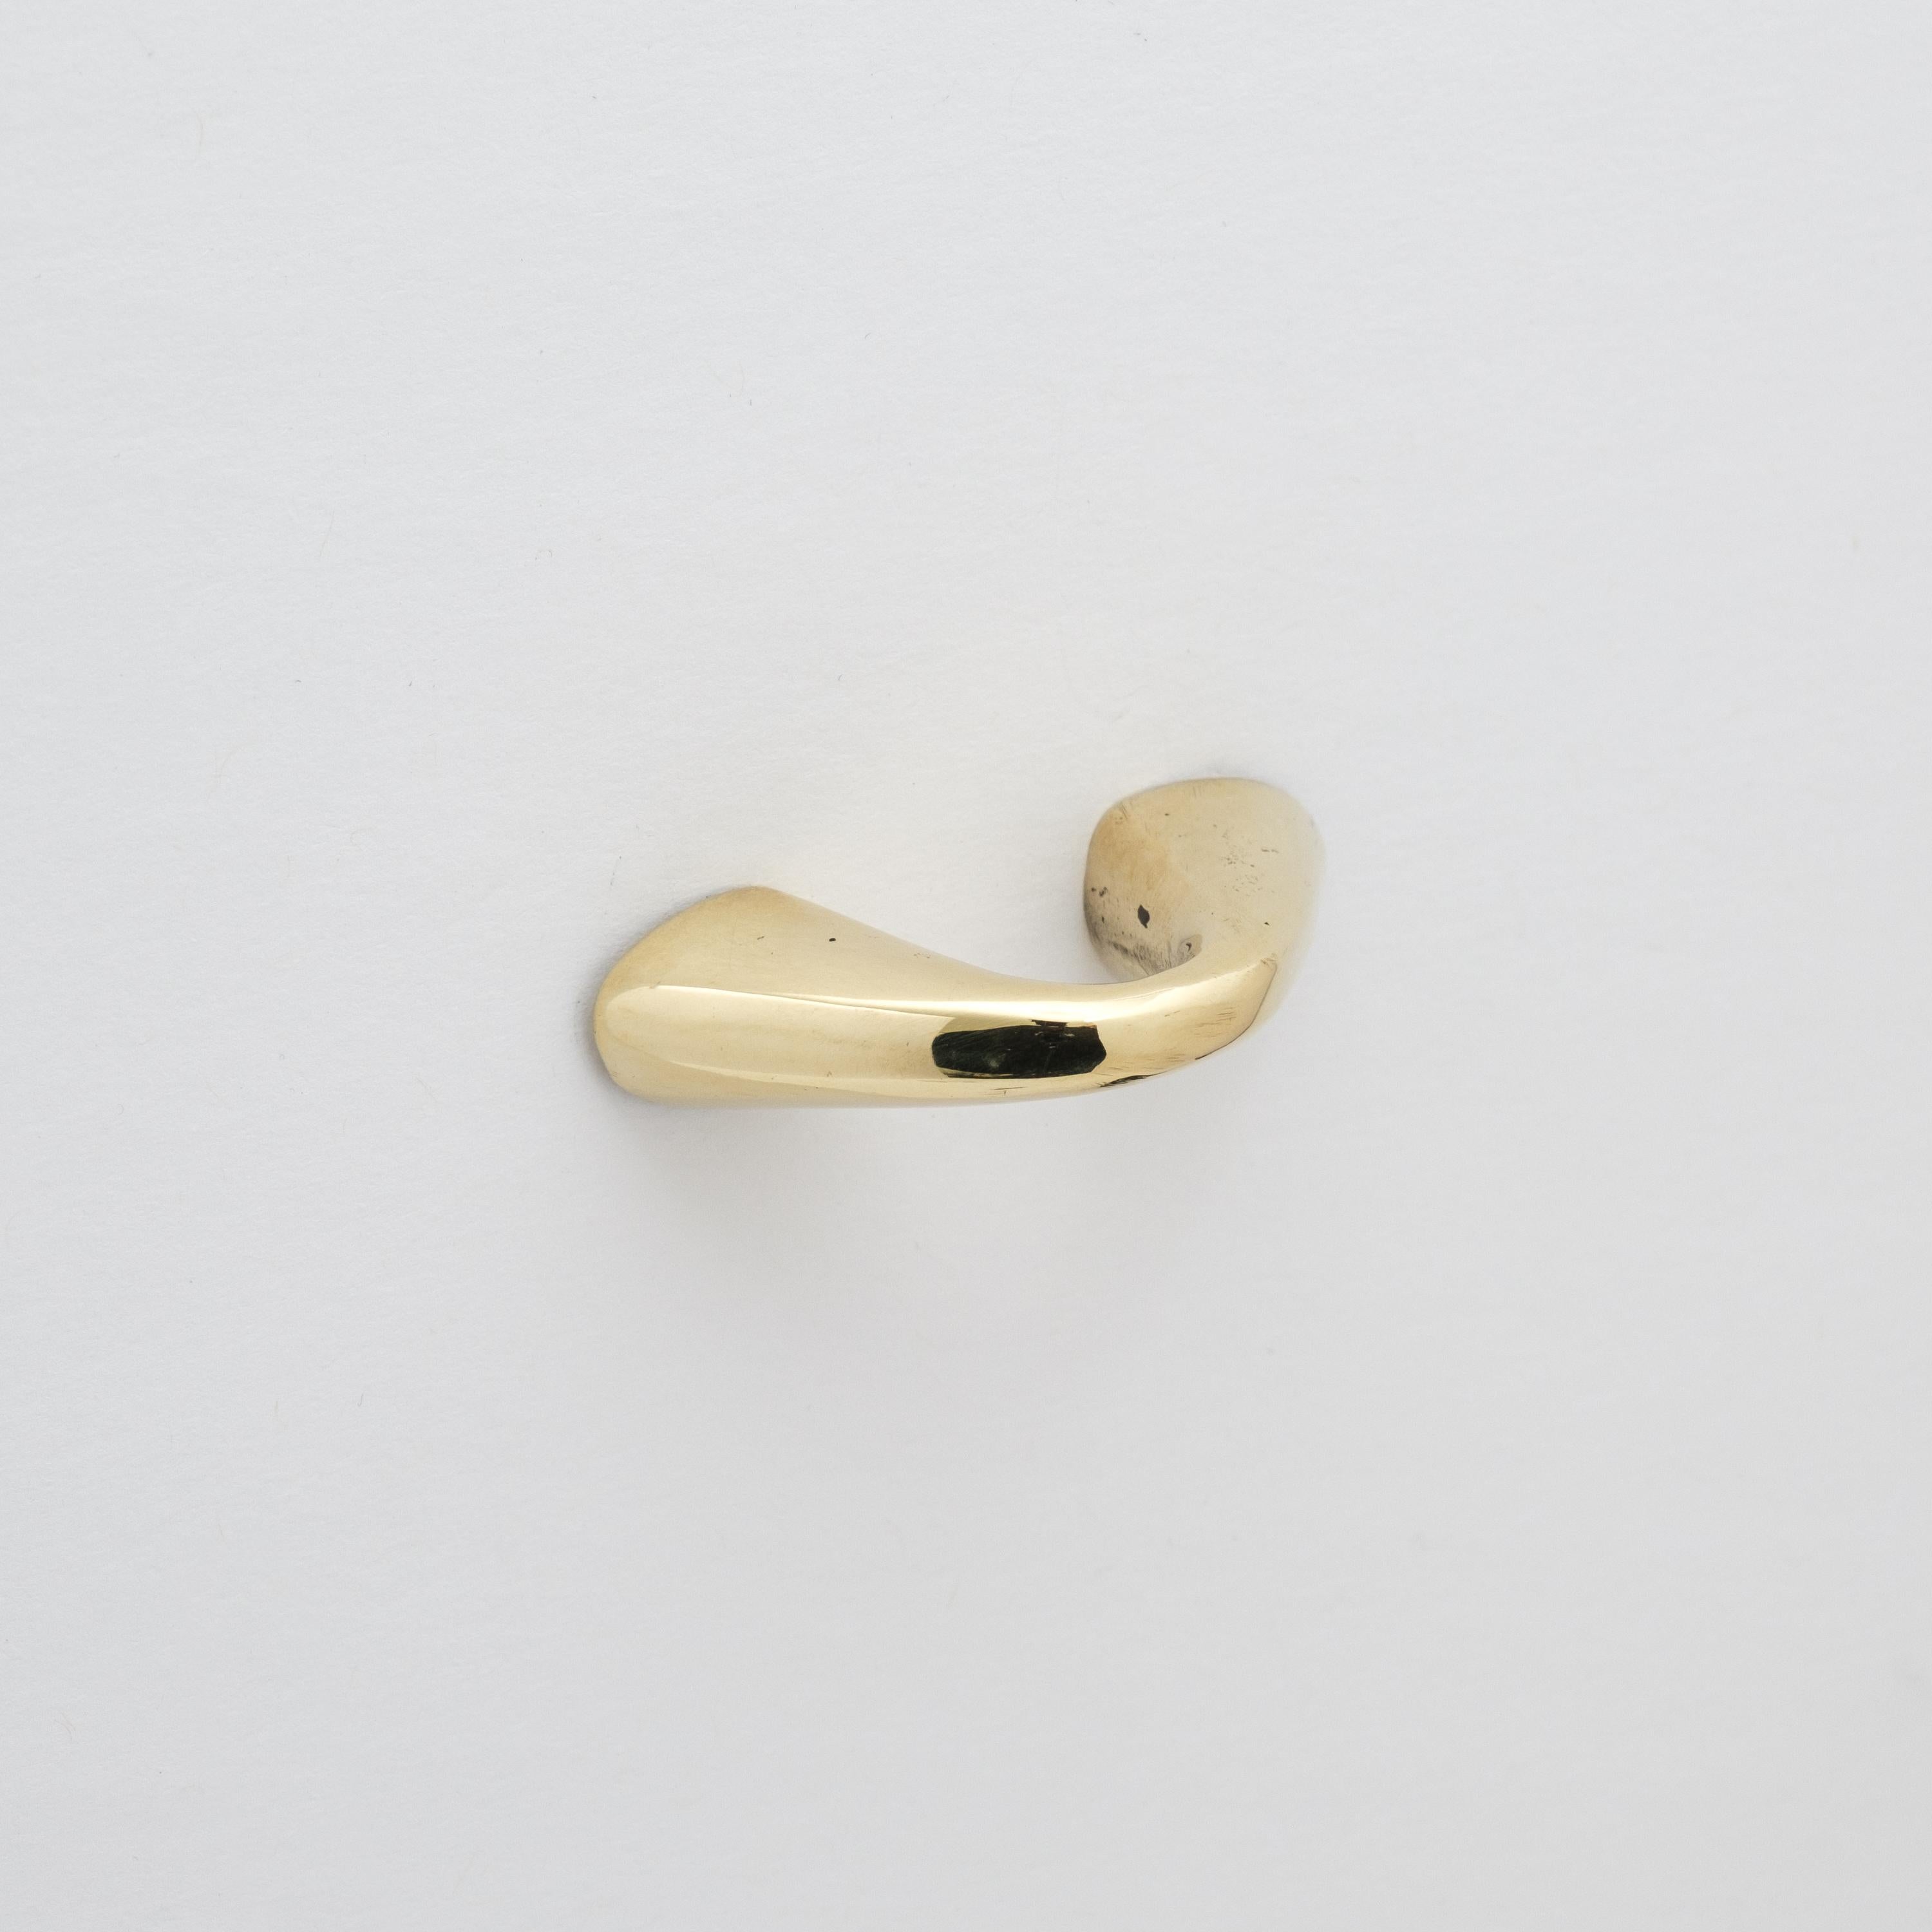 Carl Auböck Model #9030-1 polished brass drawer pull.

Designed in the 1950s, this versatile and Minimalist Viennese drawer pull is executed in polished brass by Werkstätte Carl Auböck, Austria. Its minimalist design combines clean form with